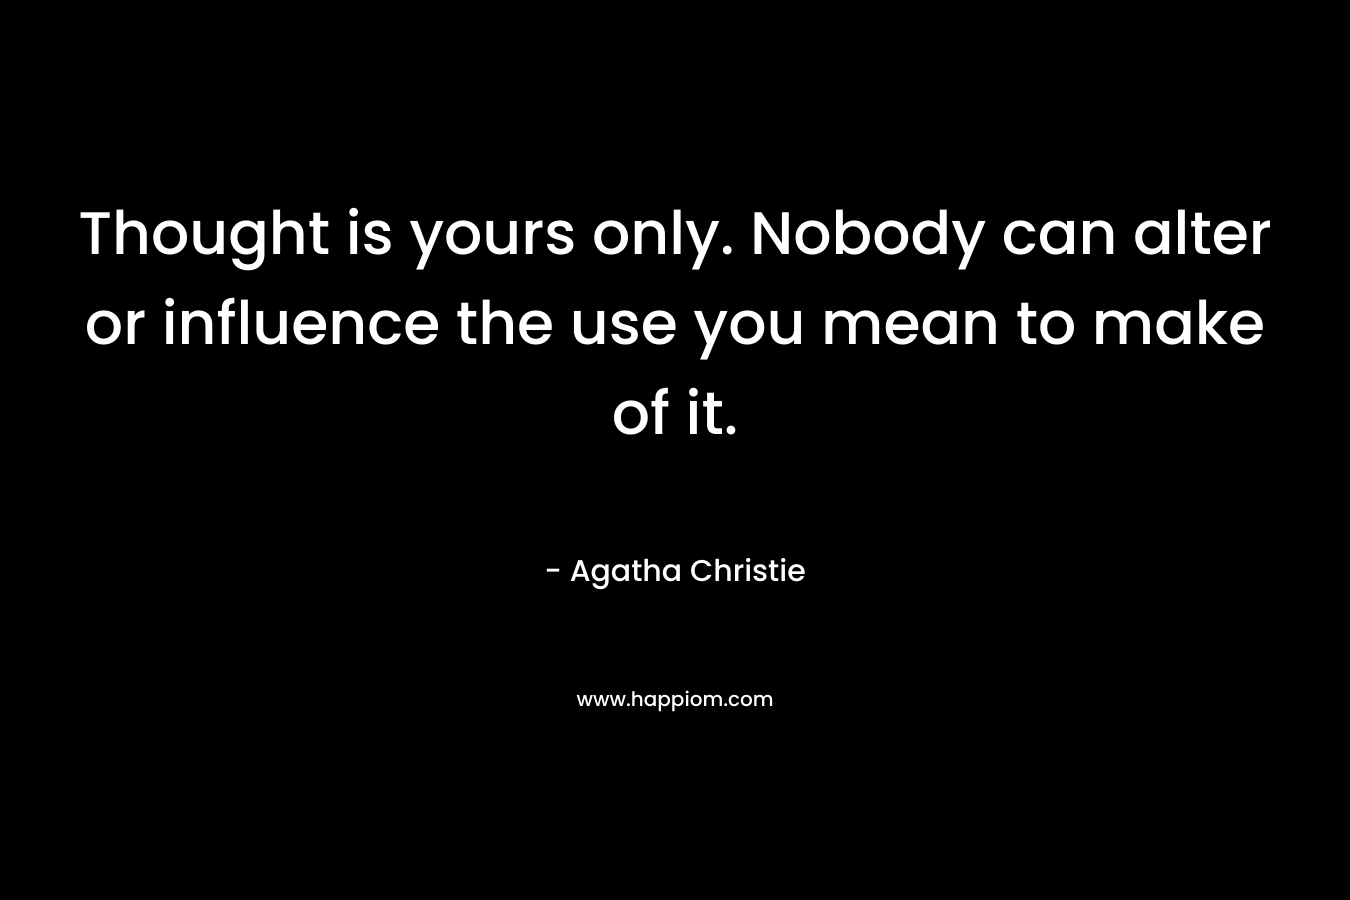 Thought is yours only. Nobody can alter or influence the use you mean to make of it. – Agatha Christie